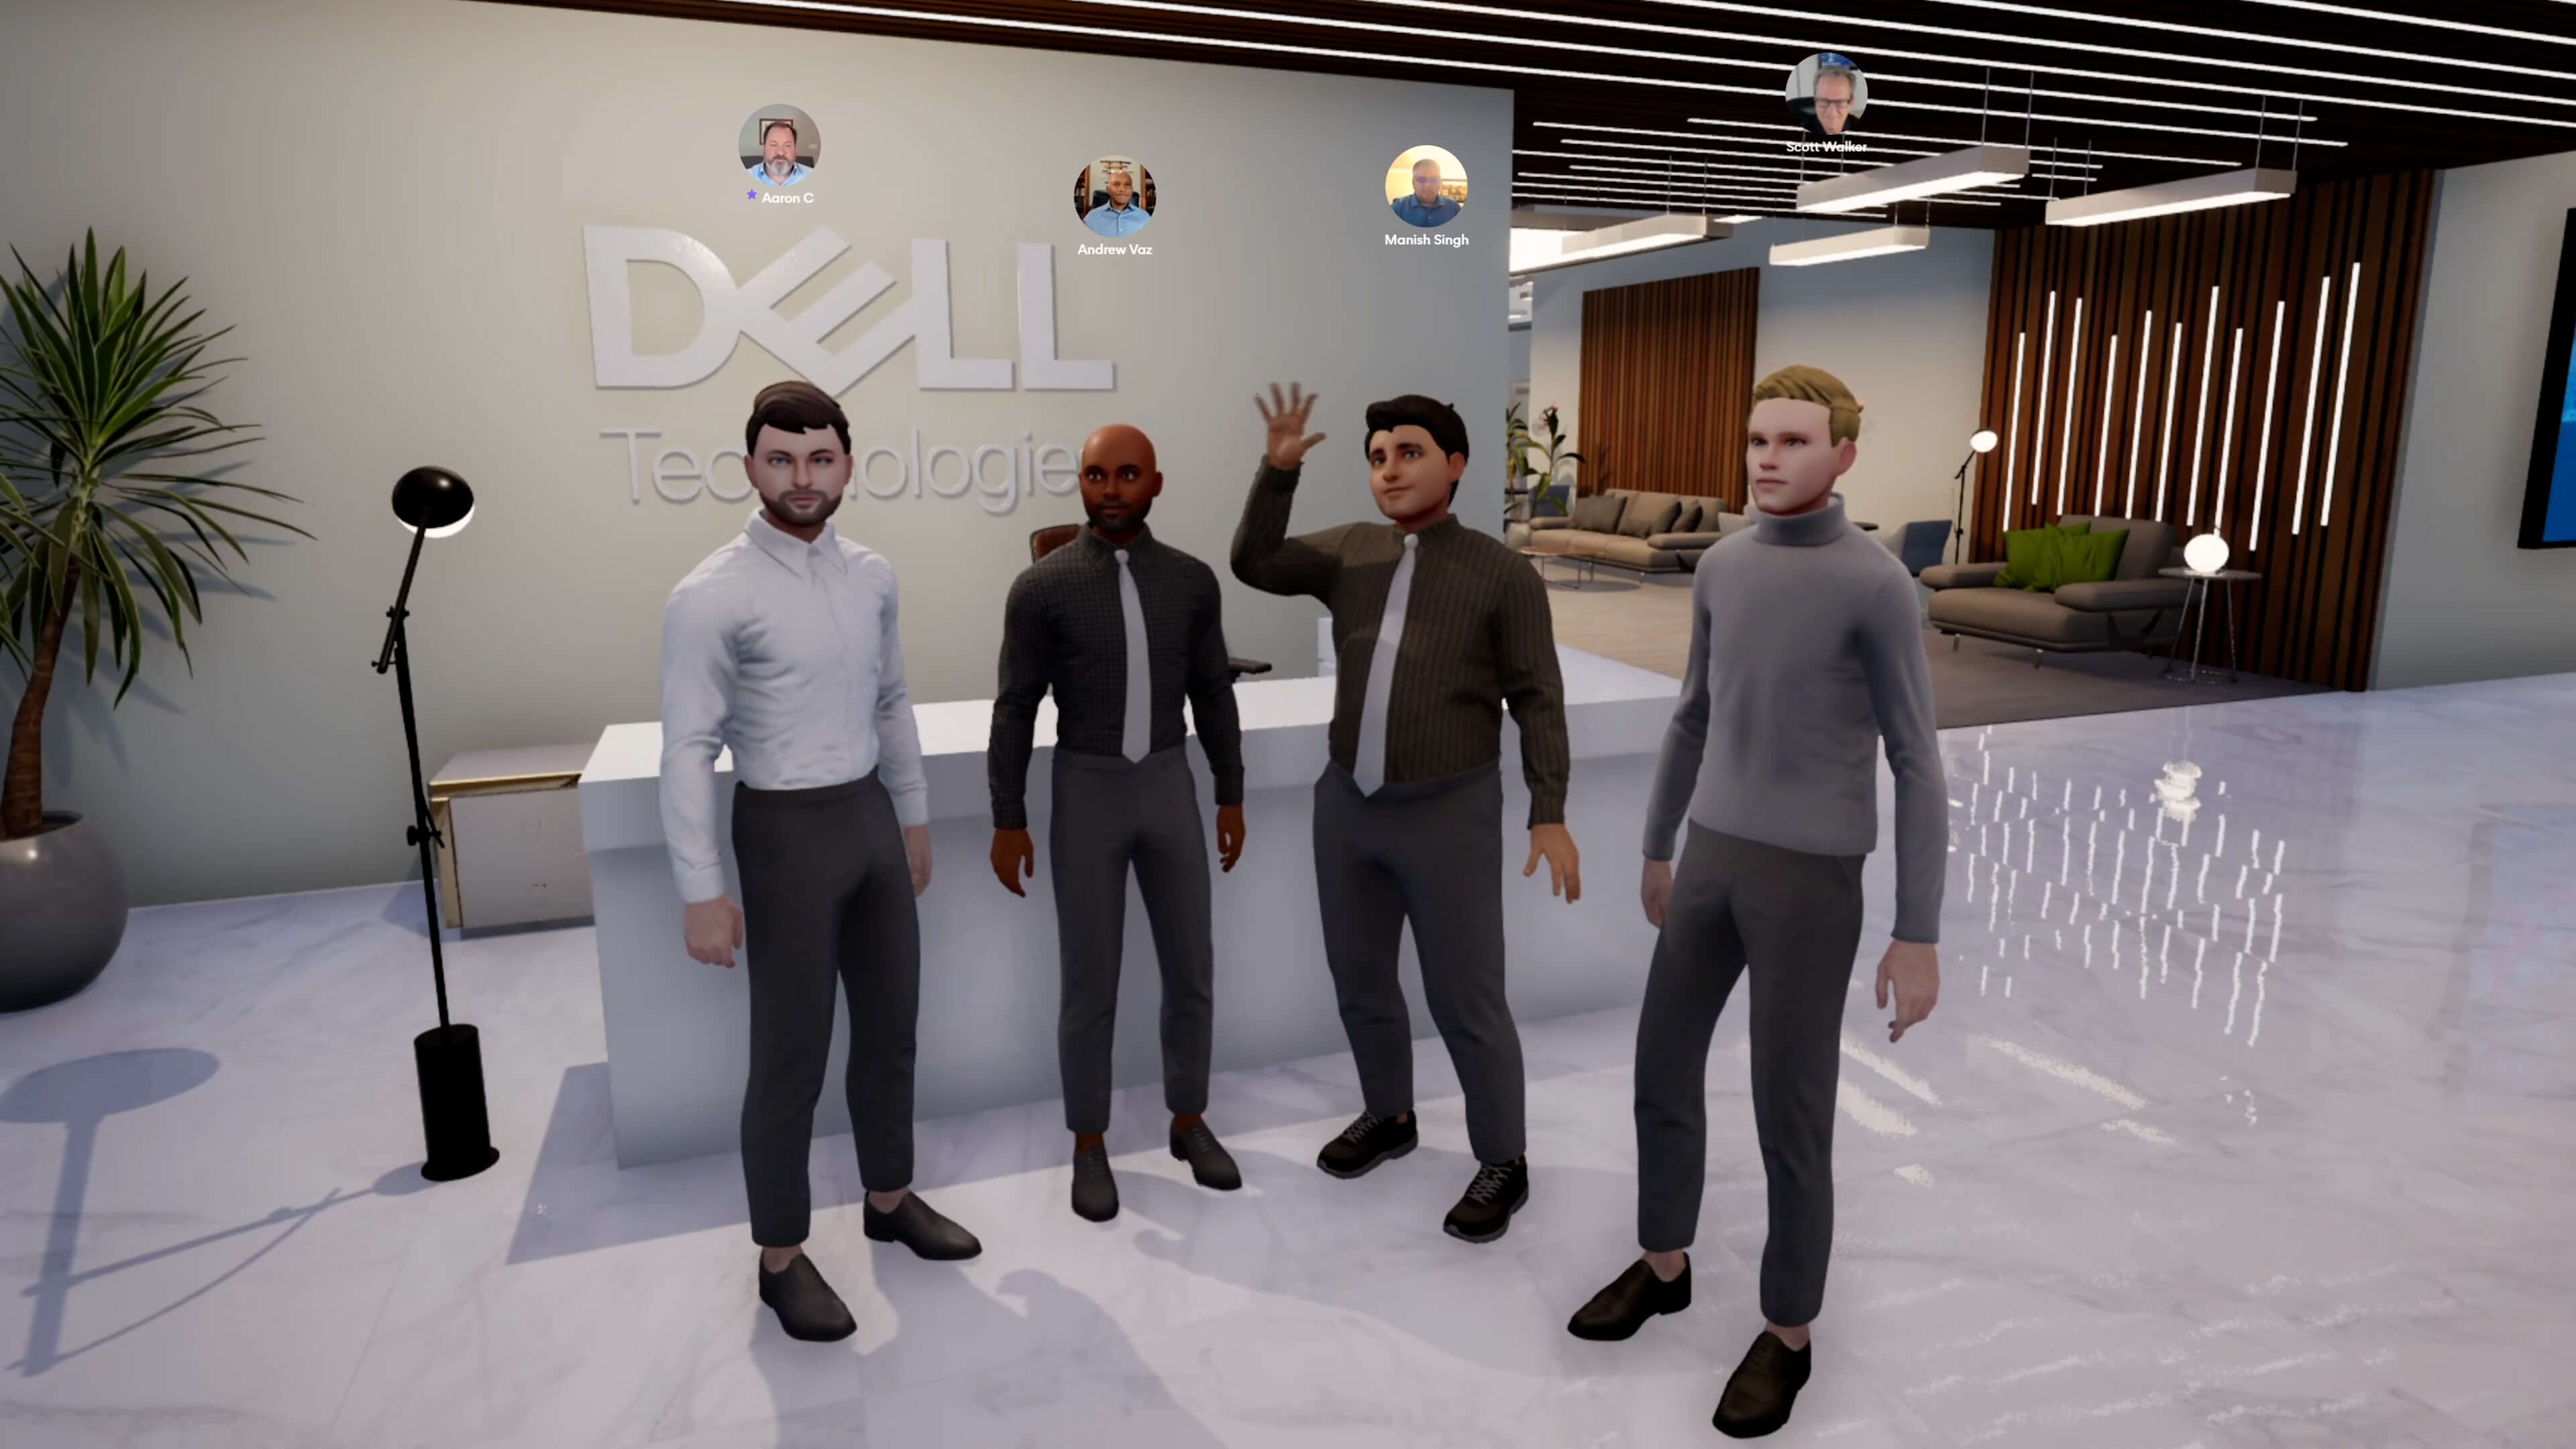 avatars-inside-dell-office-virtual-reality-space